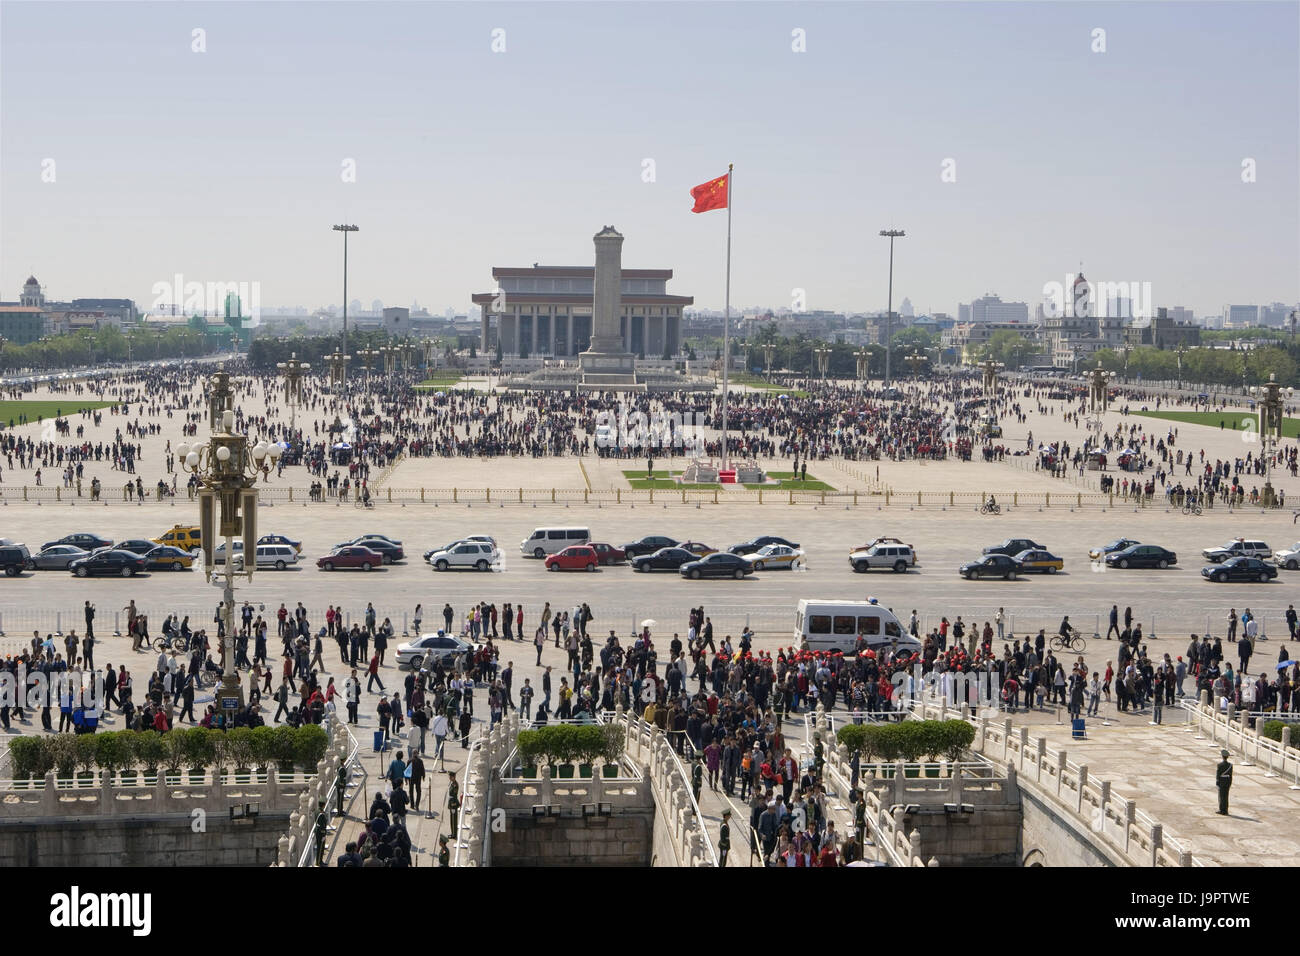 China,Peking,space of the heavenly peace,Mao mausoleum,monument of the national heroes,visitors,car,Asia,Eastern Asia,town,capital,destination,culture,place of interest,Tiananmen,building,mausoleum,monument,tourism,tourist,person,outside, Stock Photo